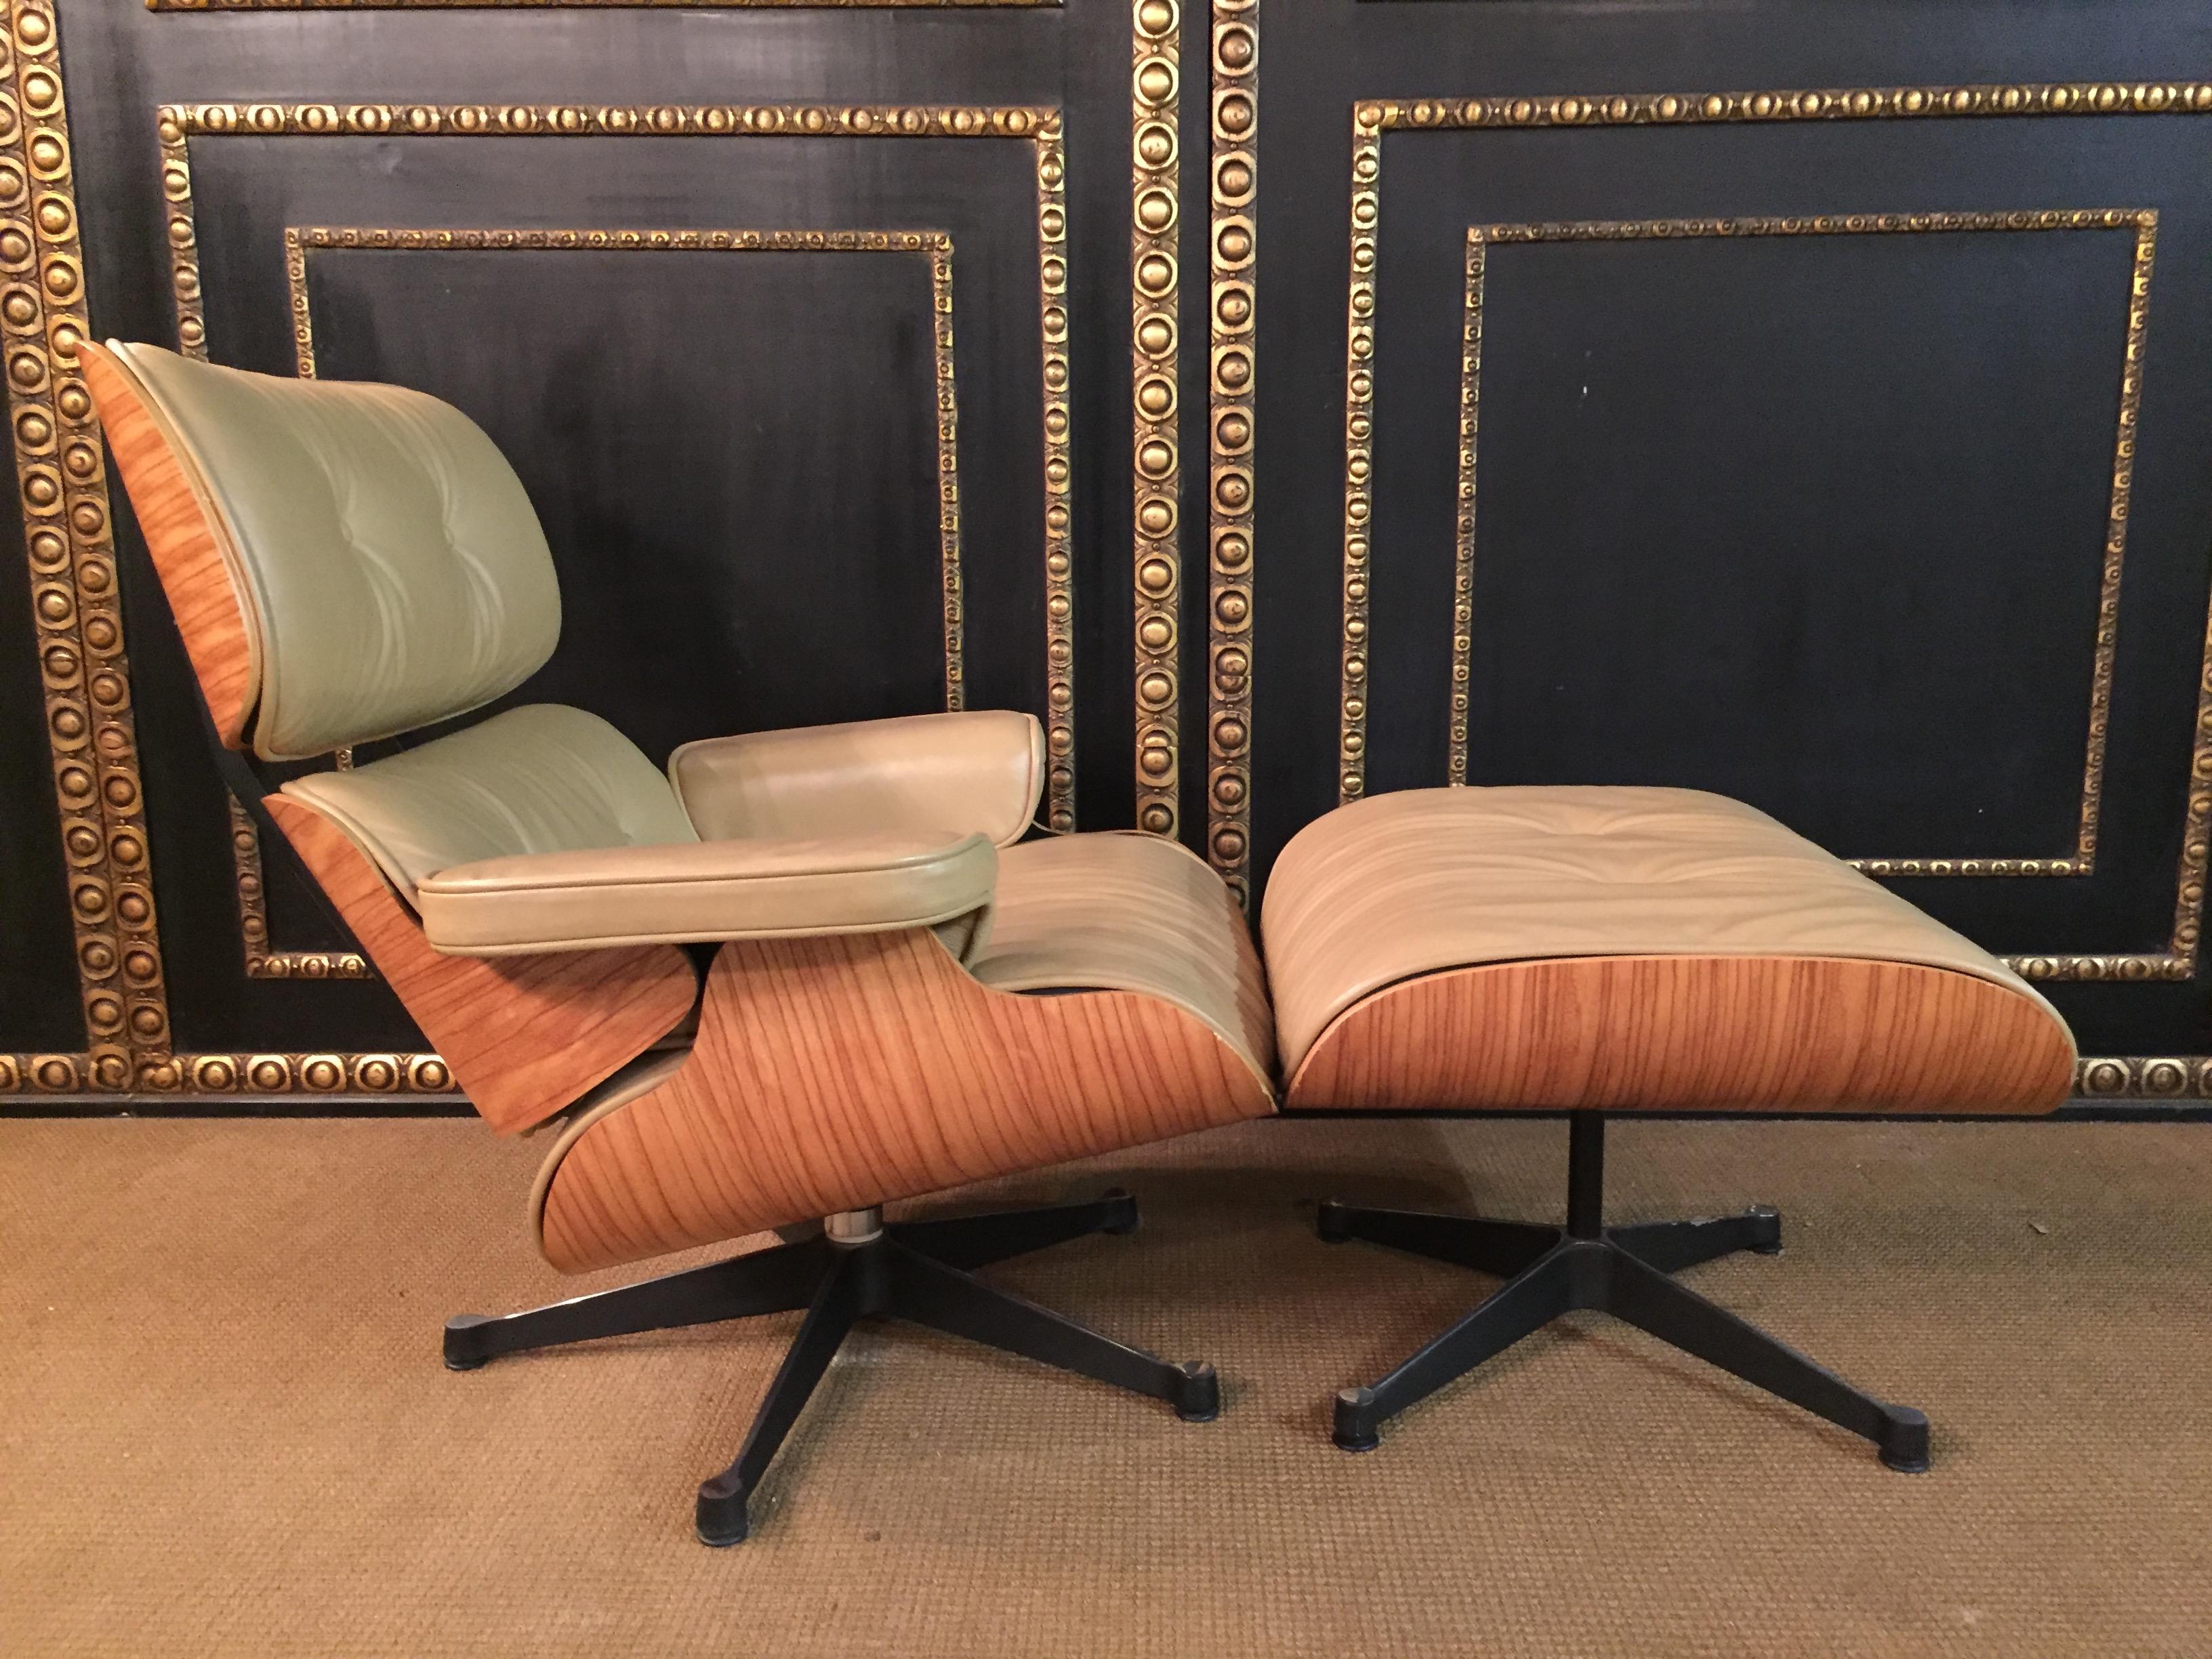 Charles Eames lounge chair style (replica) Fine italy leather. Light rosewood with ottoman. finest Italian quality. Like the original, all parts are removable and the leather is with a decorative closure to open.
Beautiful color caramel.